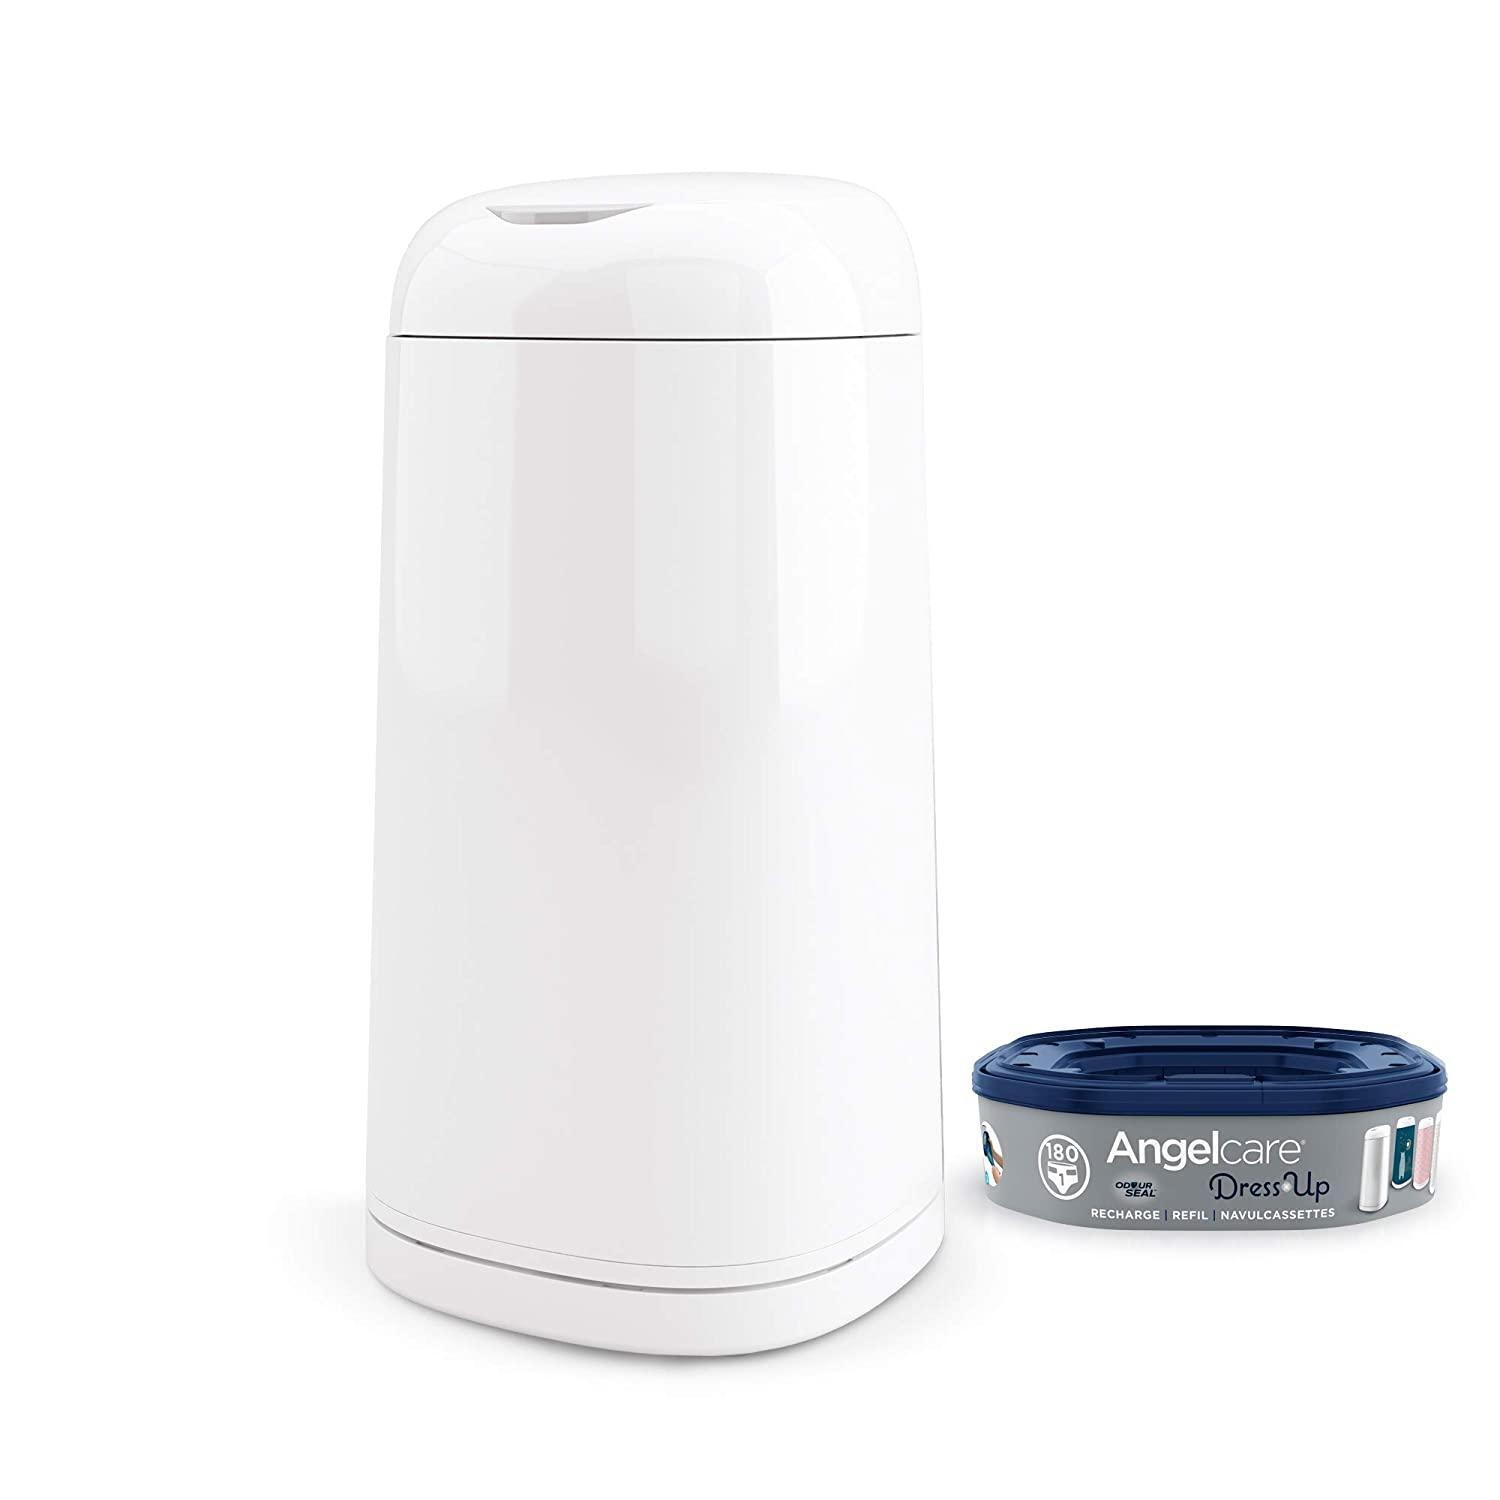 AngelCare Nappy Disposal System - Angelcare